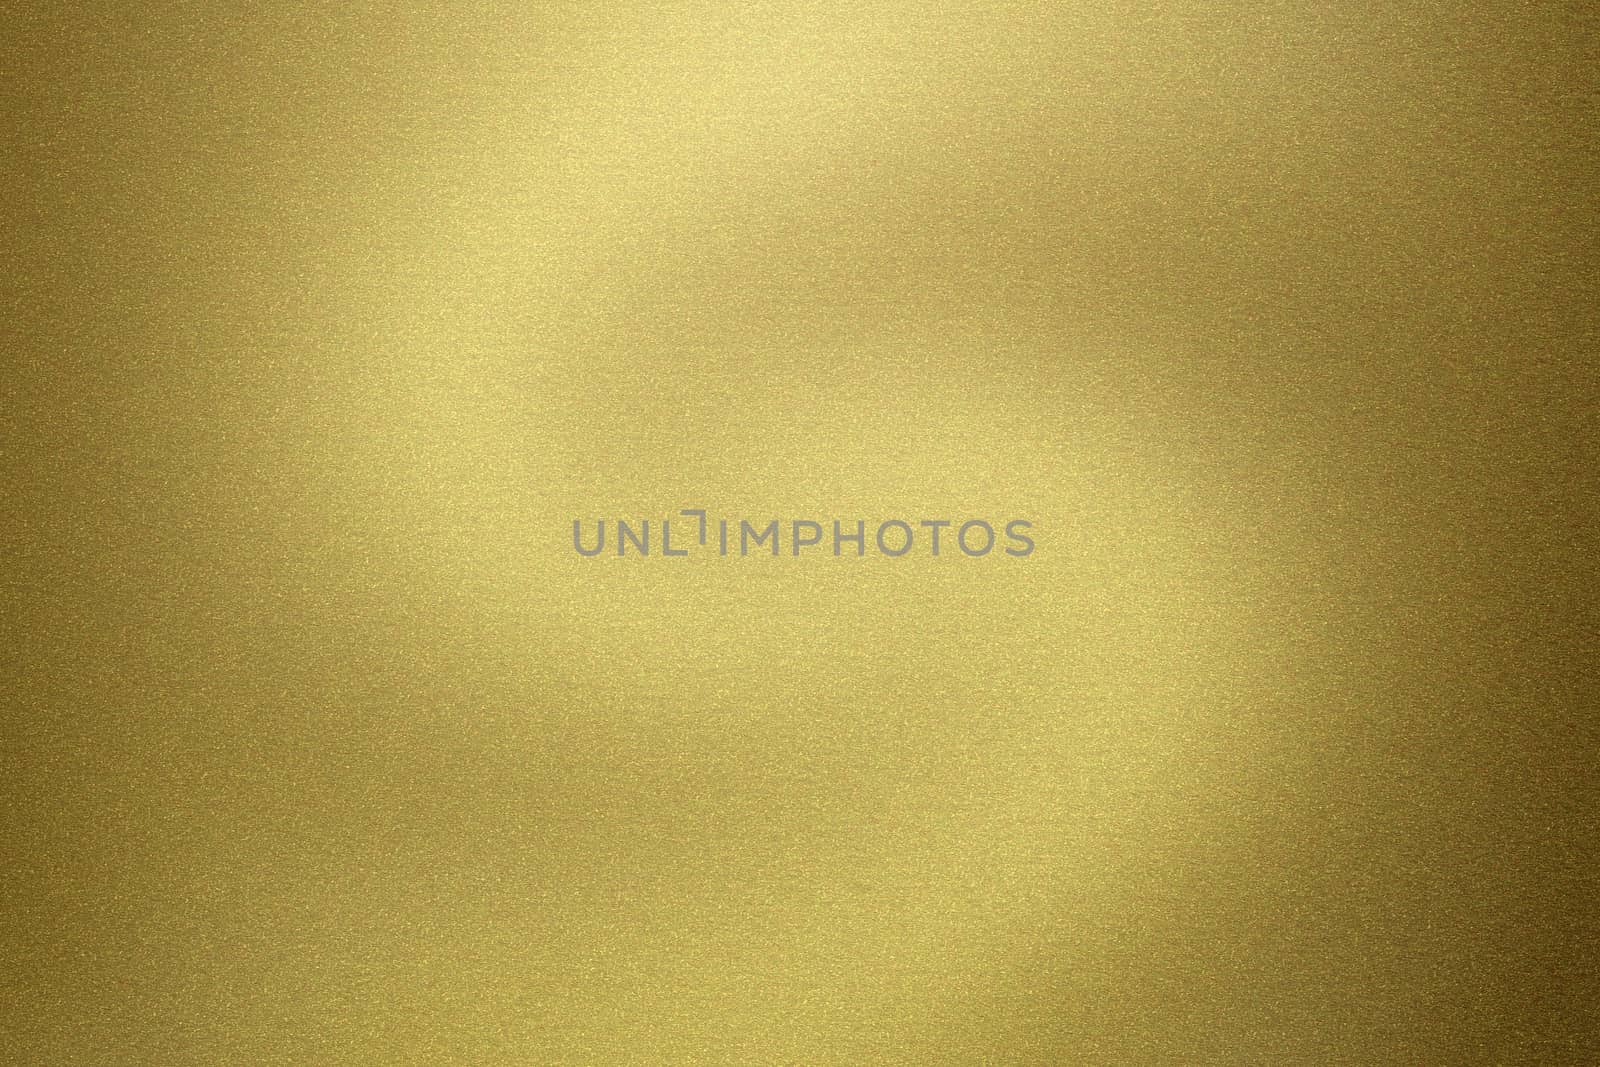 Brushed glossy golden metallic texture, abstract background